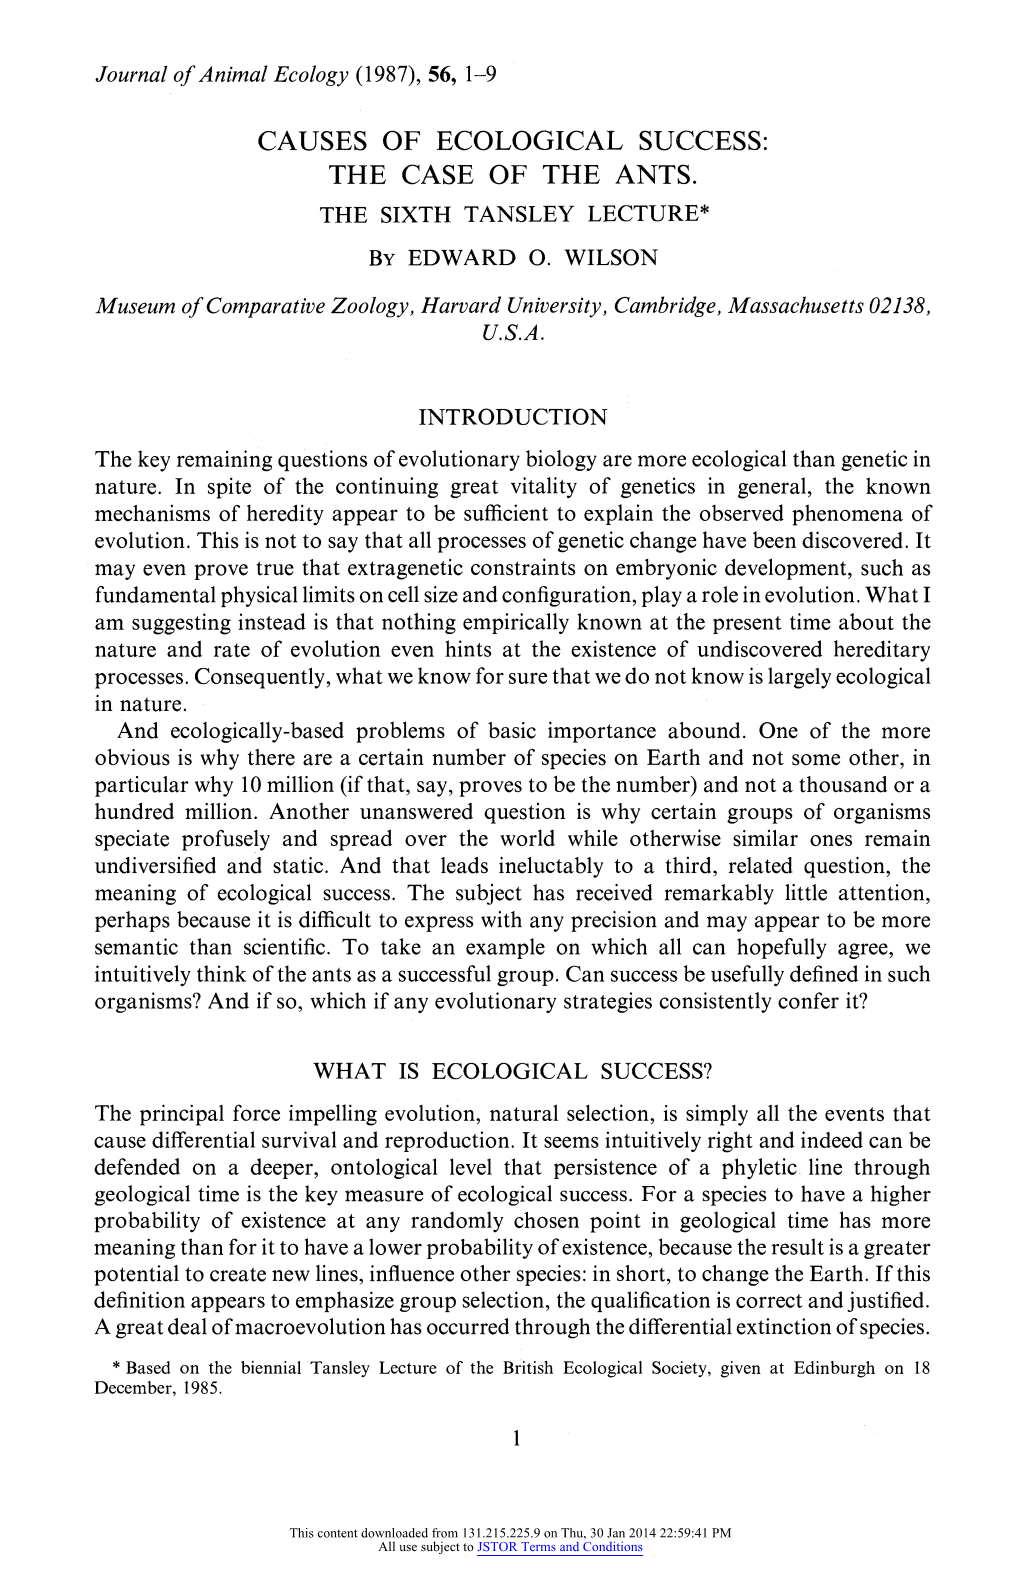 Causes of Ecological Success: the Case of the Ants